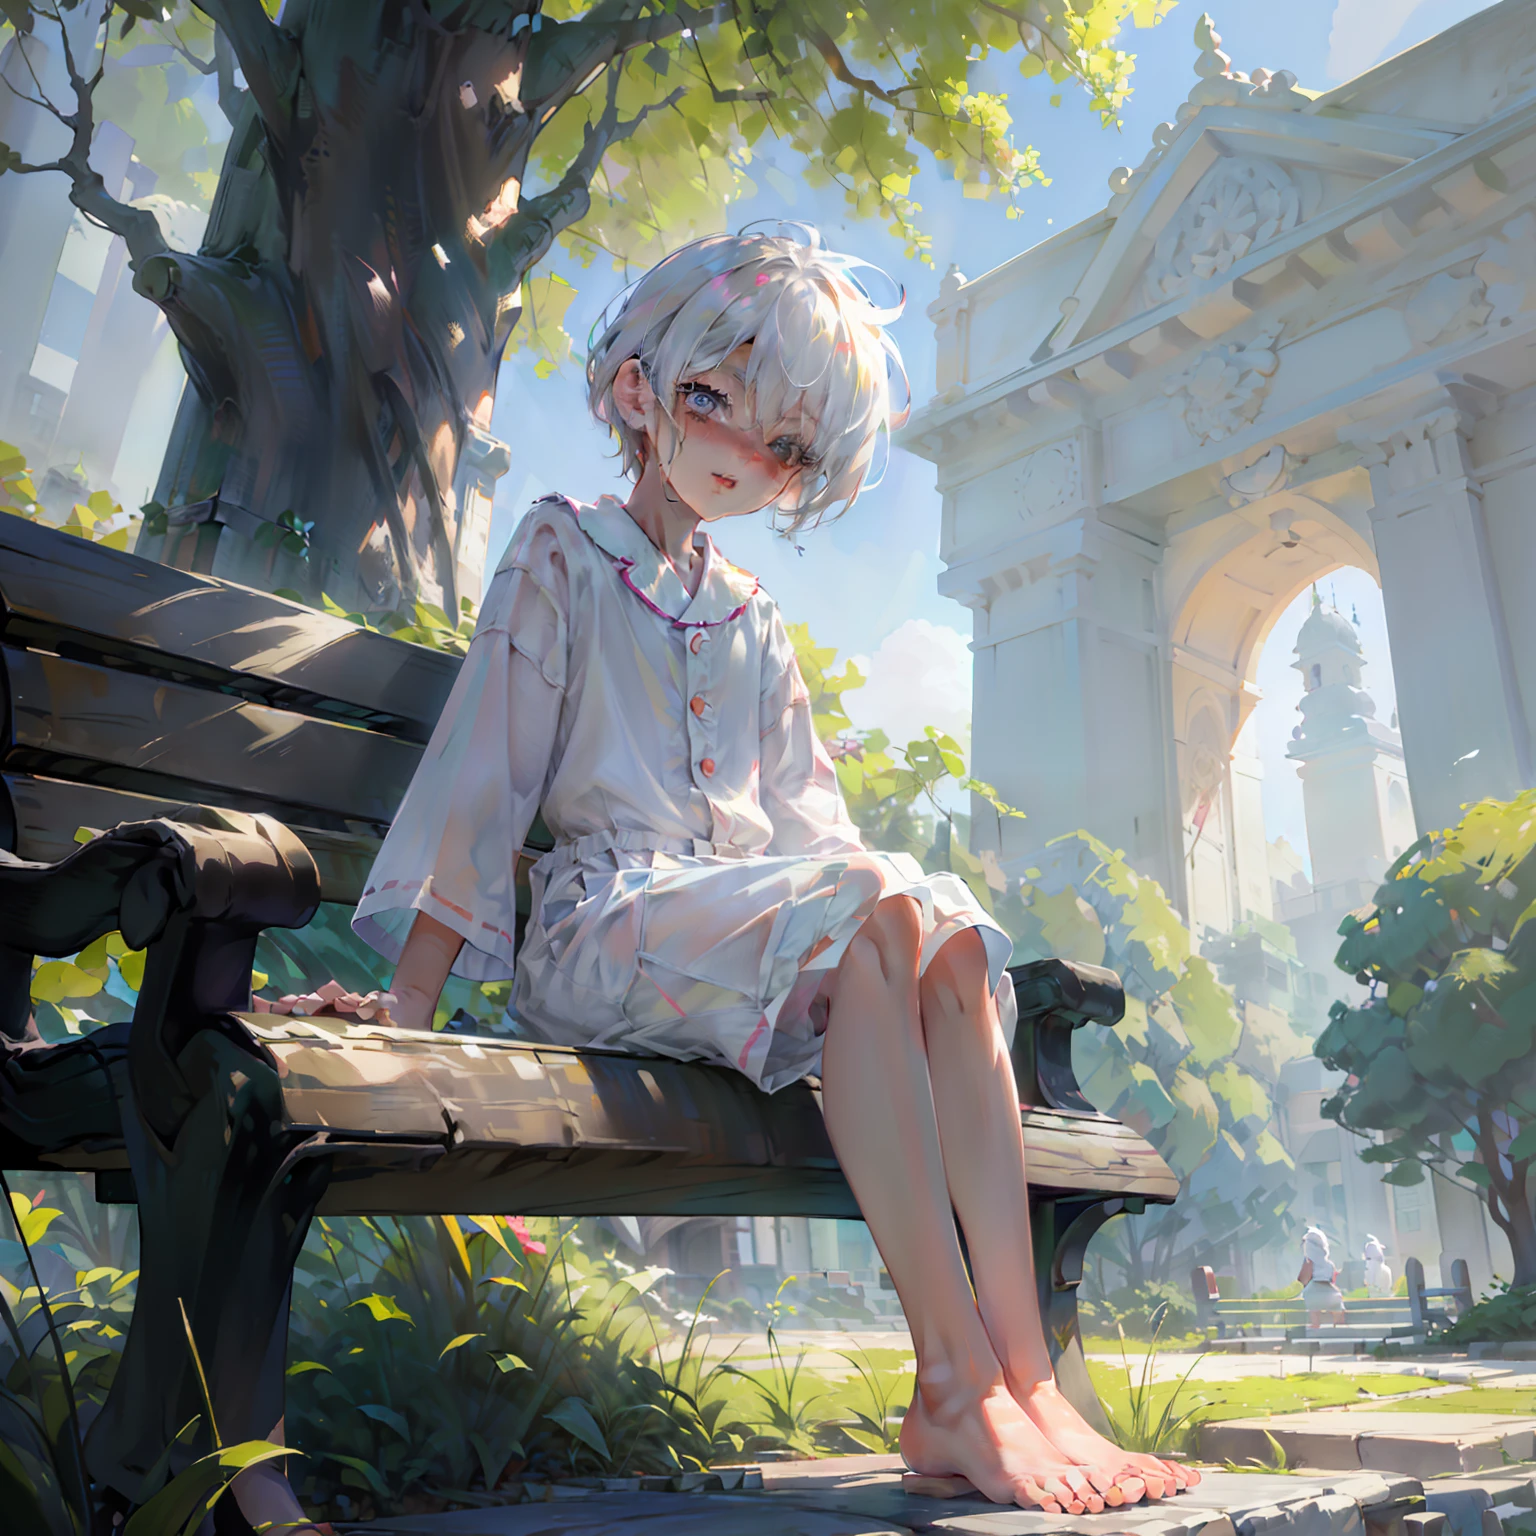 4K), Cute 7 year old little boy with white hair and barefoot and romper pajamas, He sits on a bench in the park and shows his feet, und betet, Regentag, Nebel Licht, Impressionismus, 2D, (Dornen: 1.1), (toter Baum: 1.1) Focused on the feet,